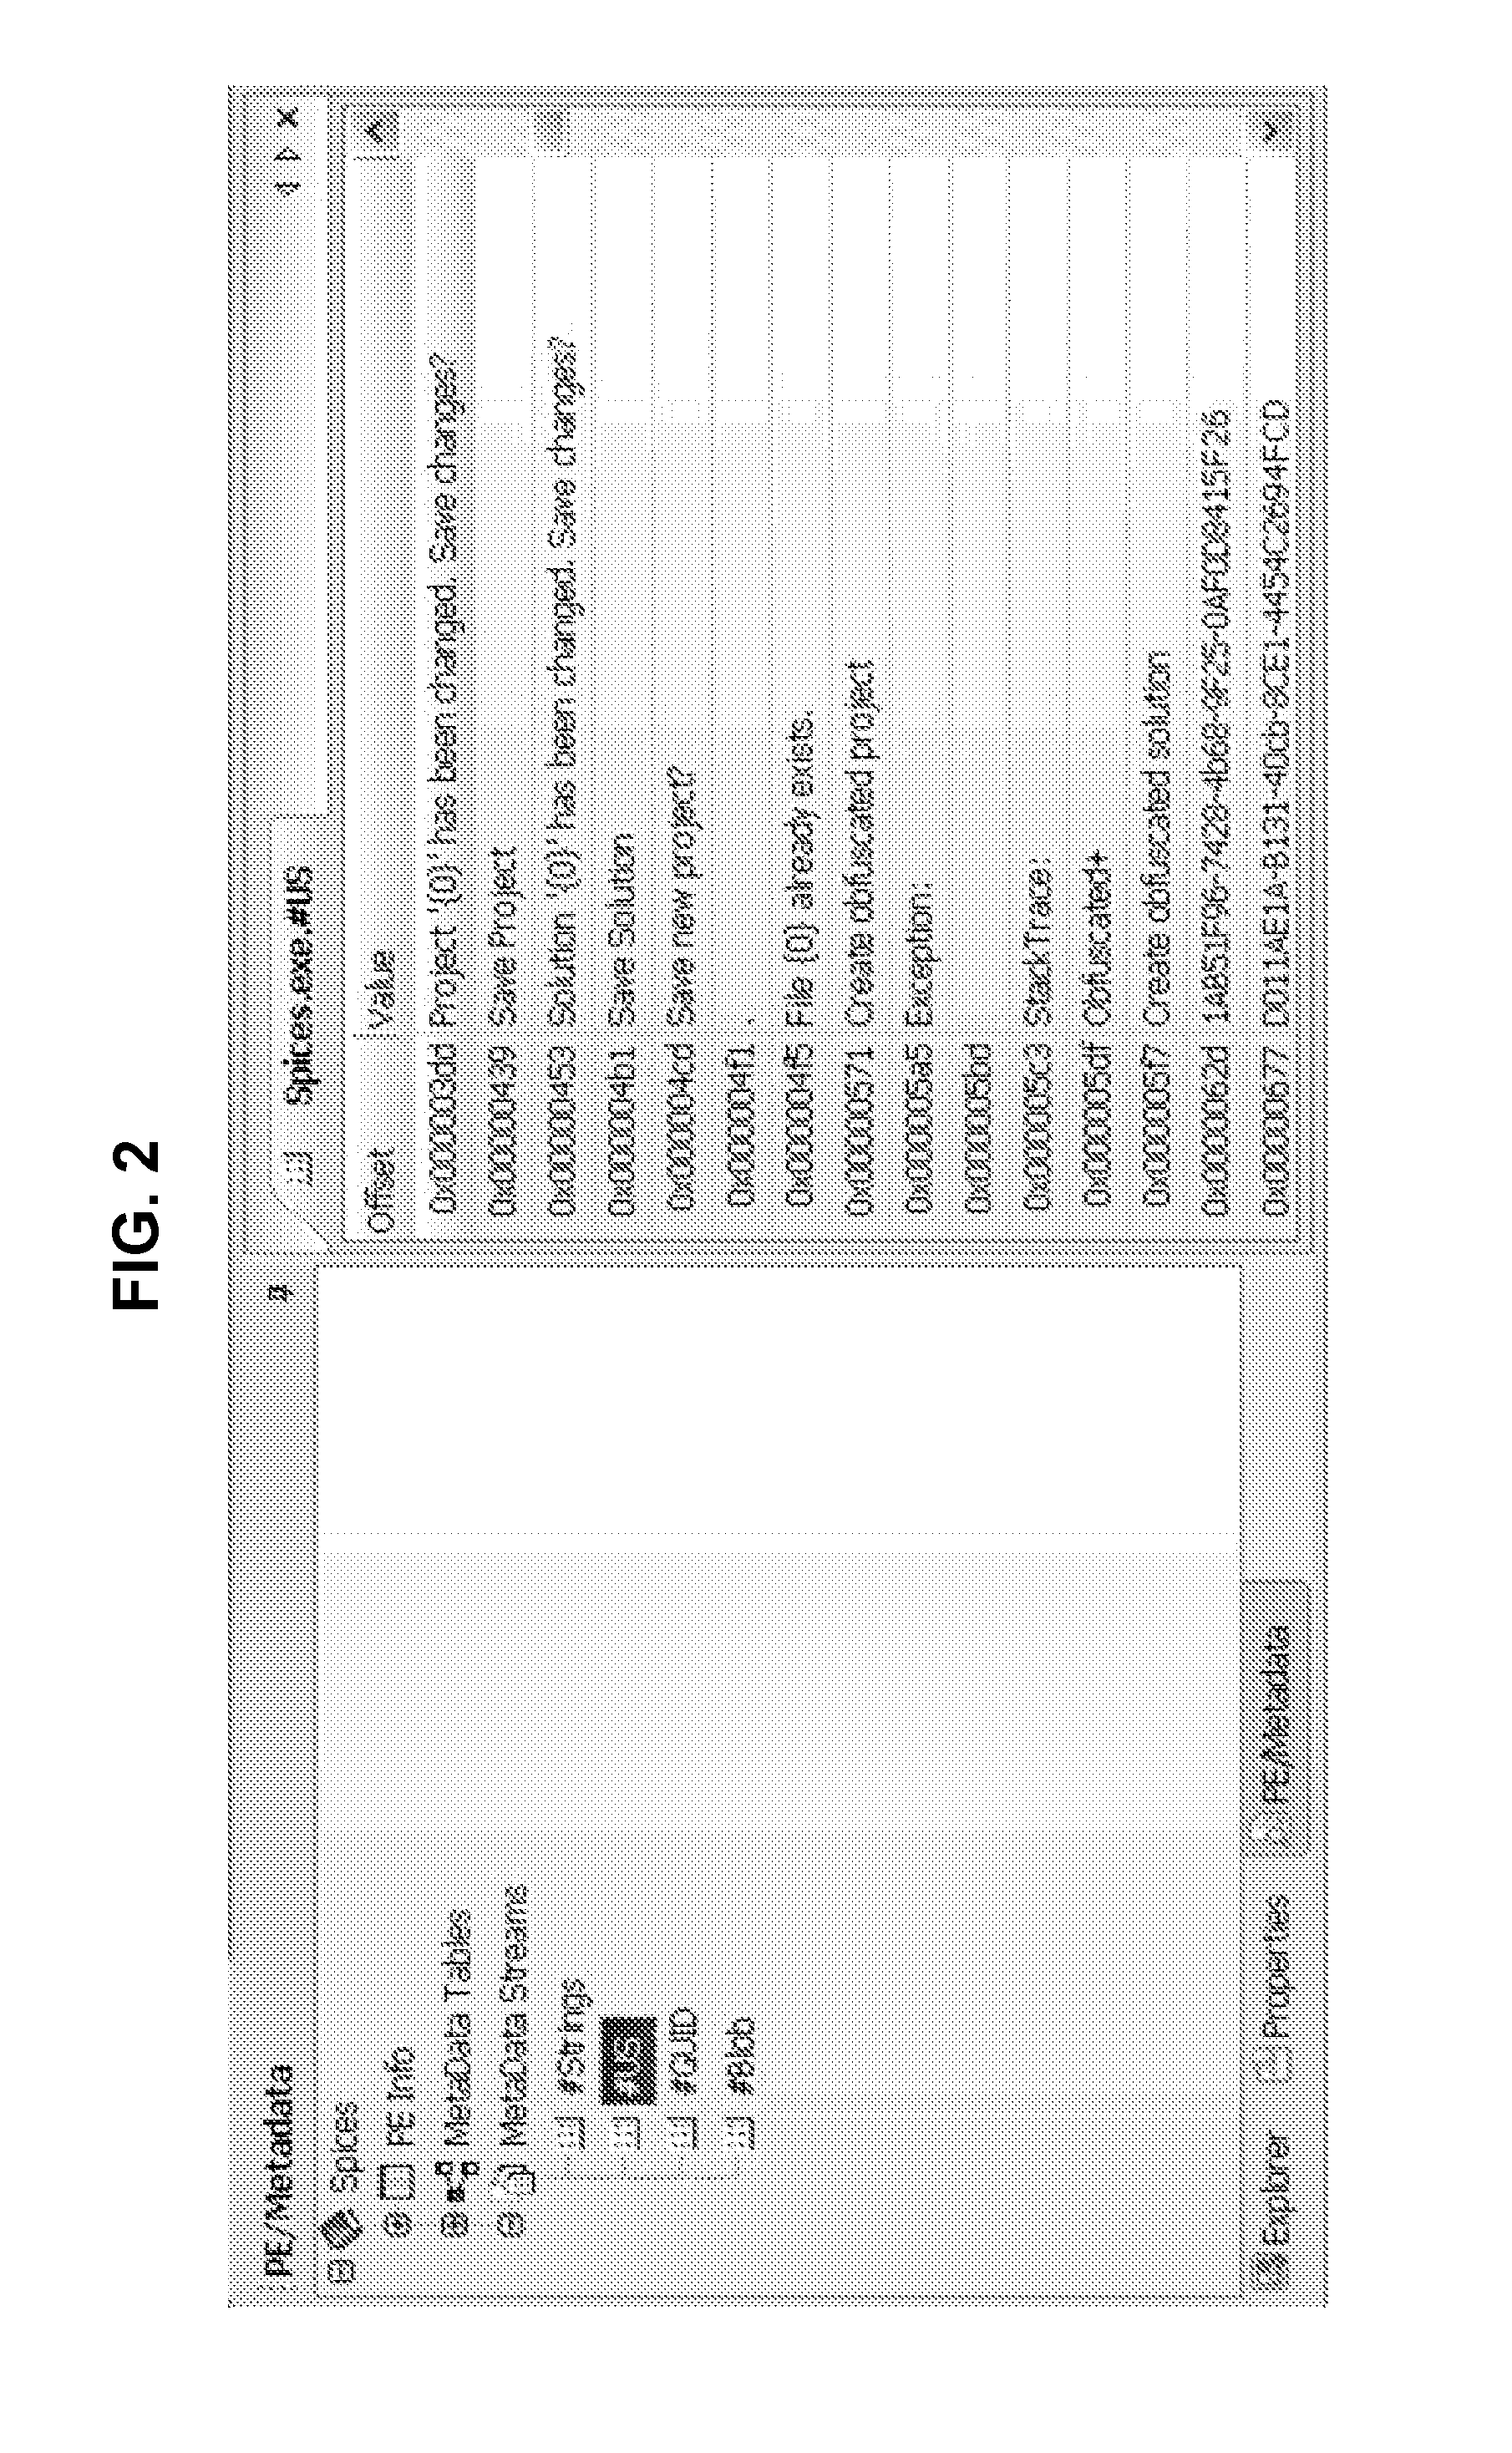 System and method for tamper-proofing executable binary assemblies